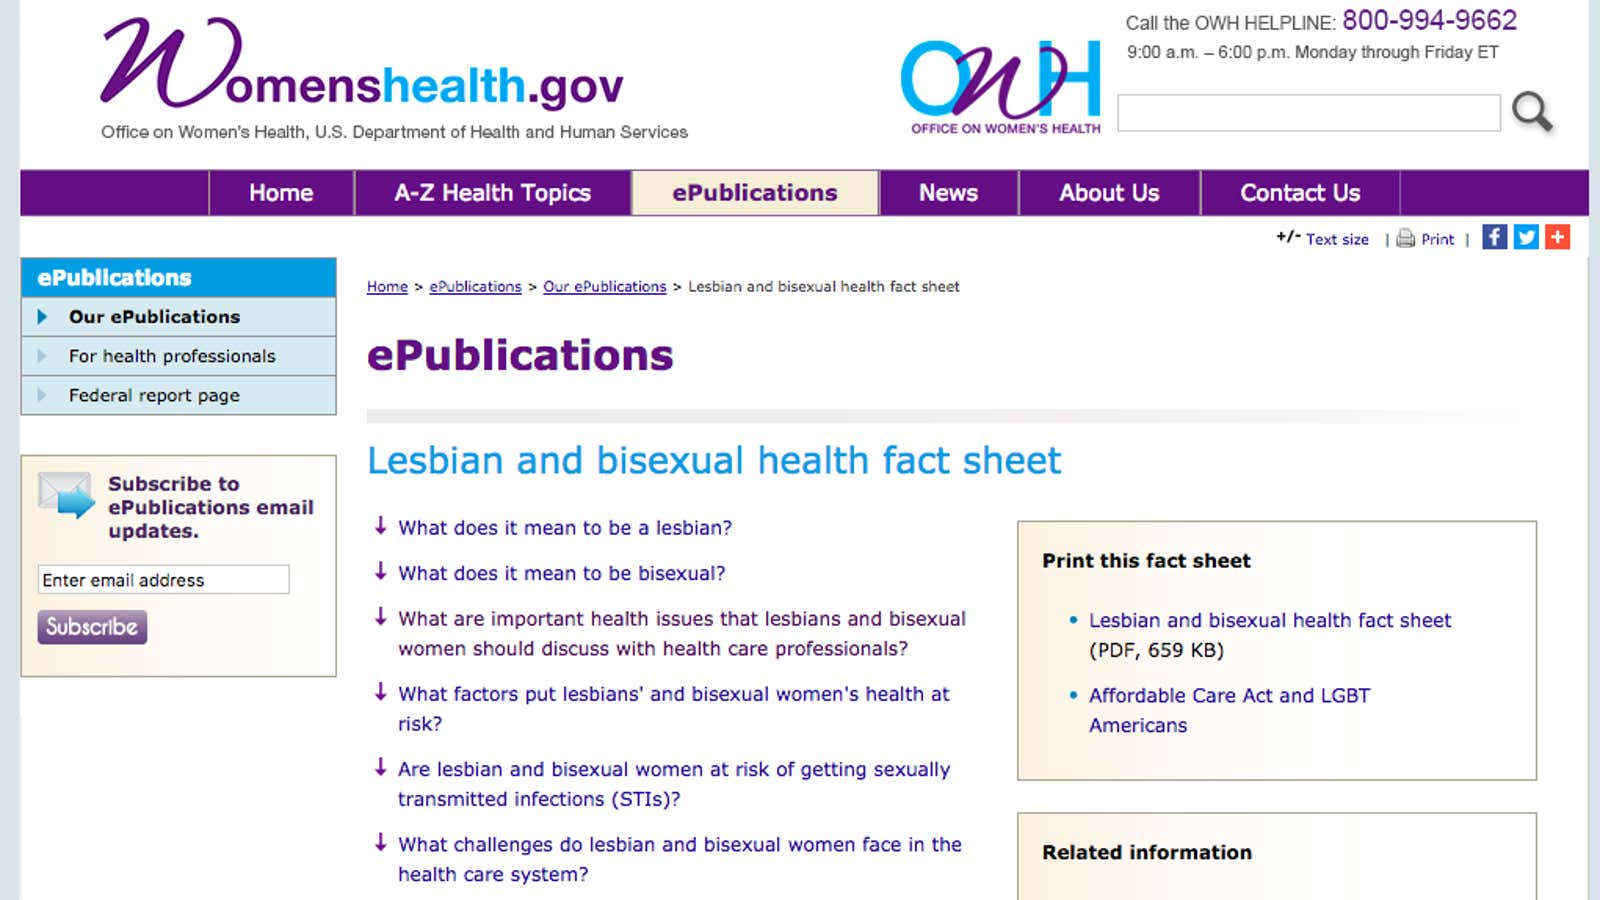 Lesbians and bisexual women face unique health risks. The government information page about them is gone.